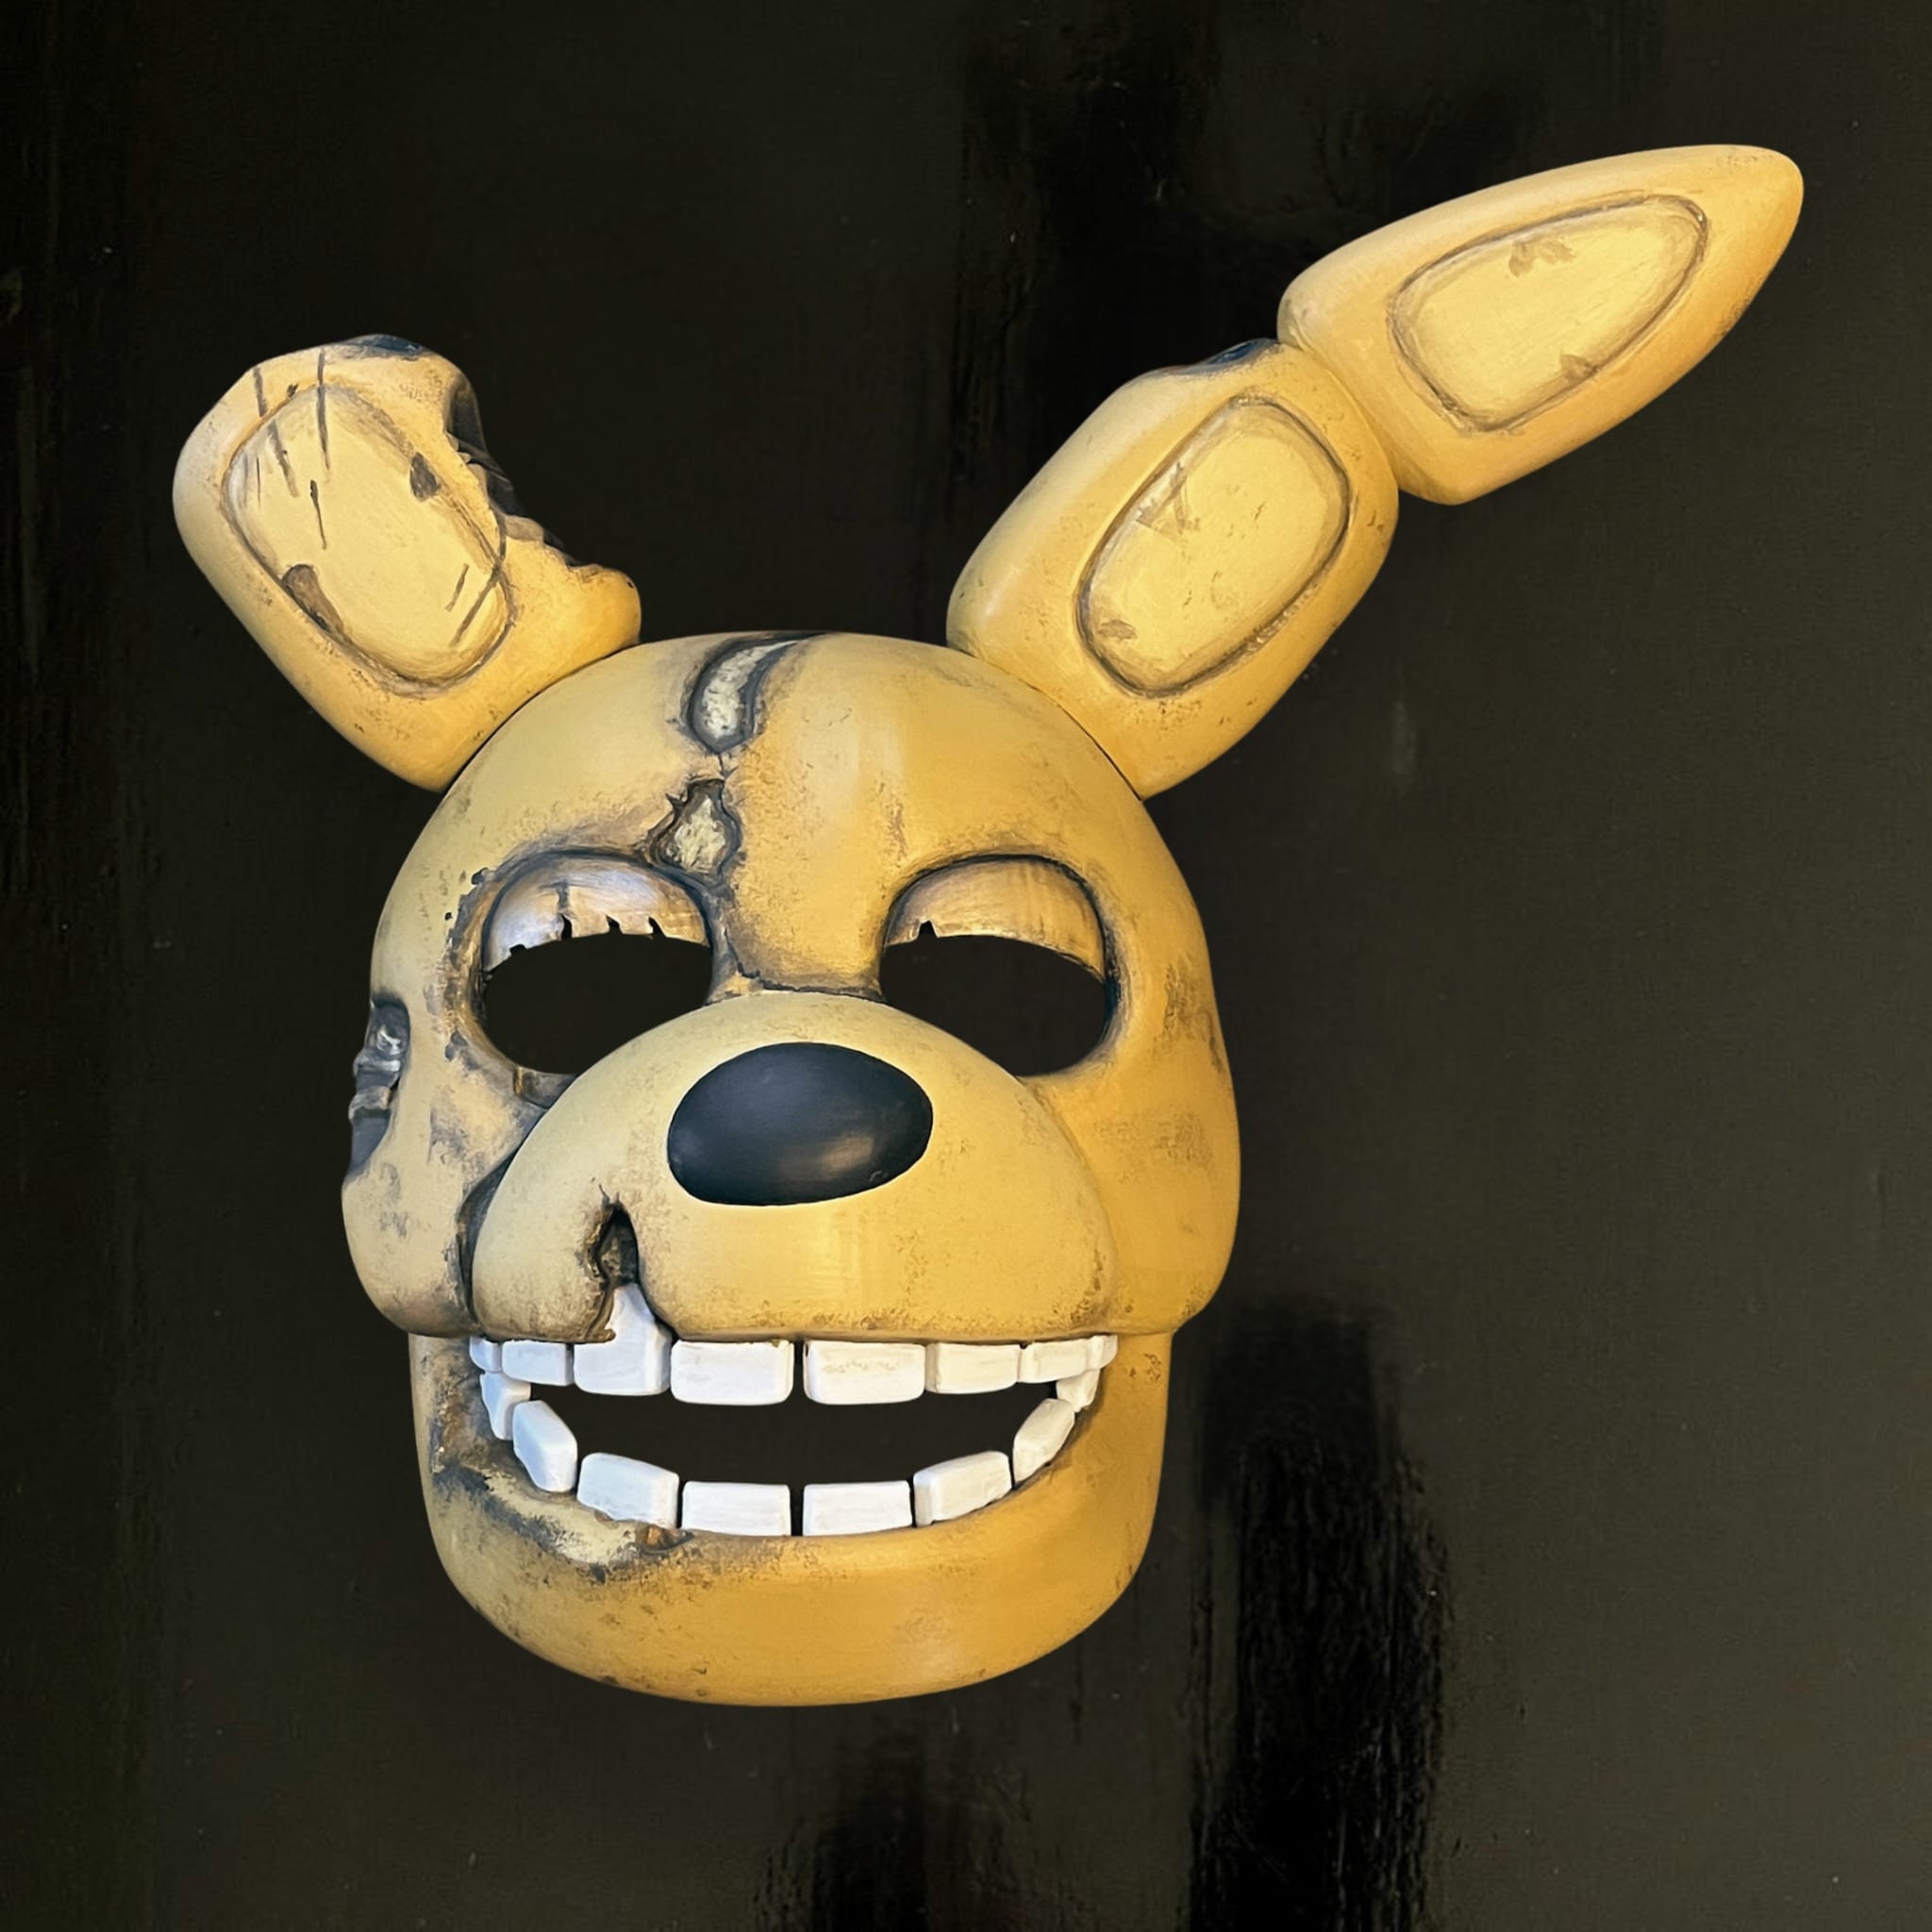 Five Nights at Freddys Mask 